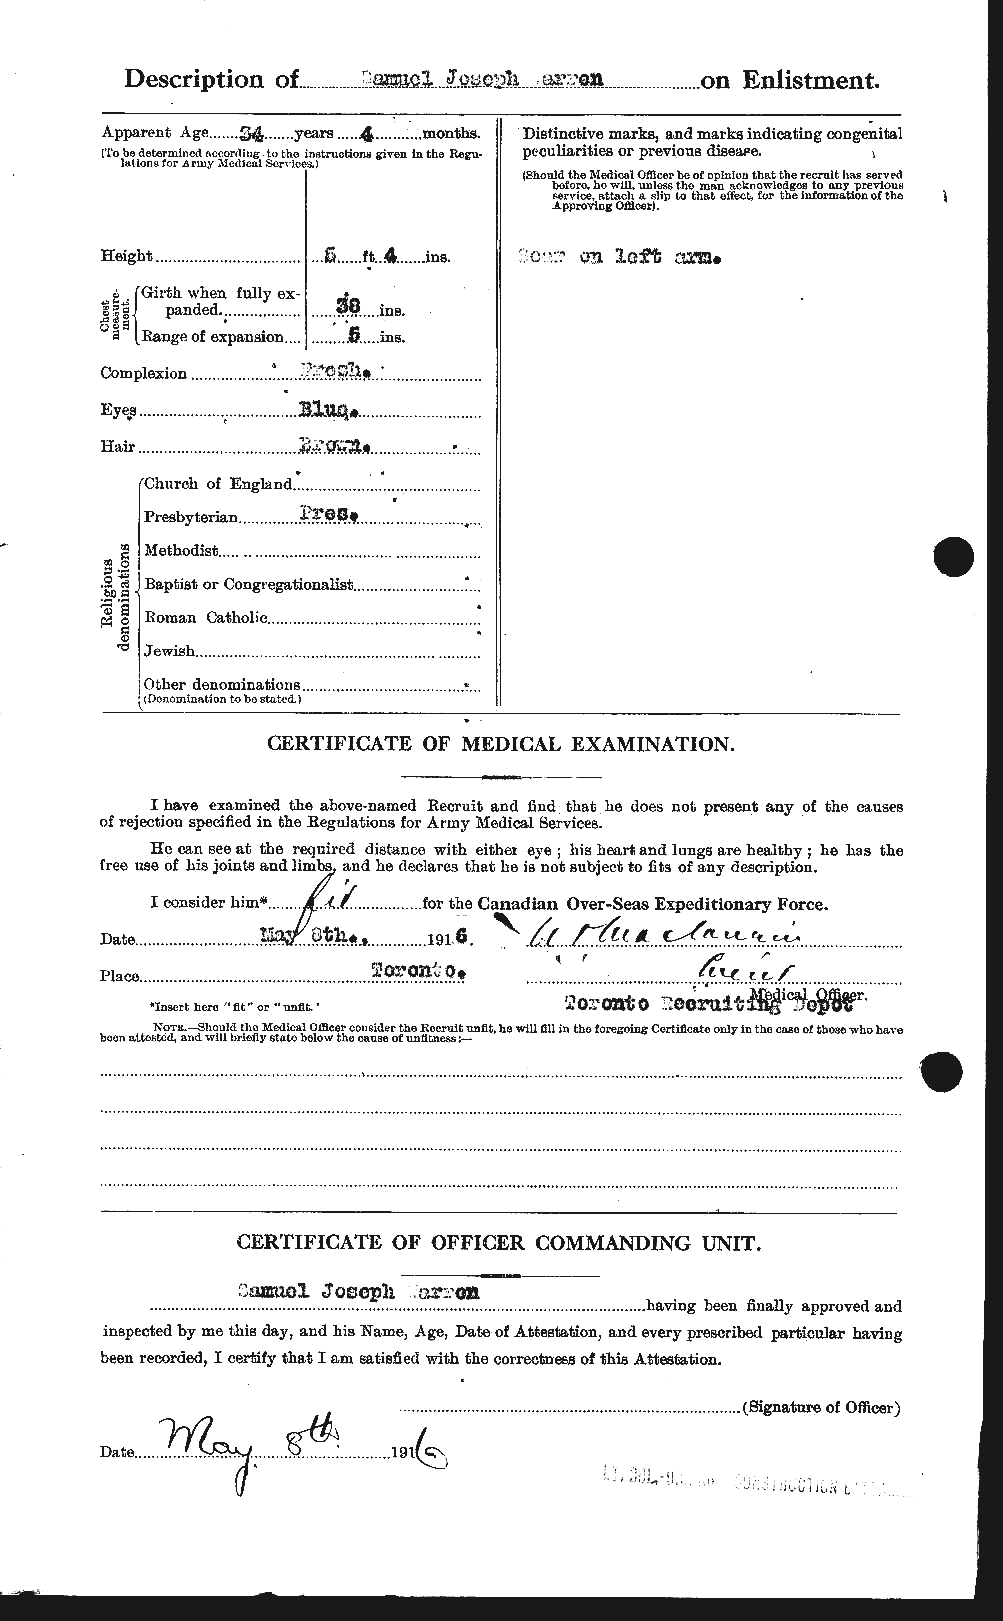 Personnel Records of the First World War - CEF 658634b